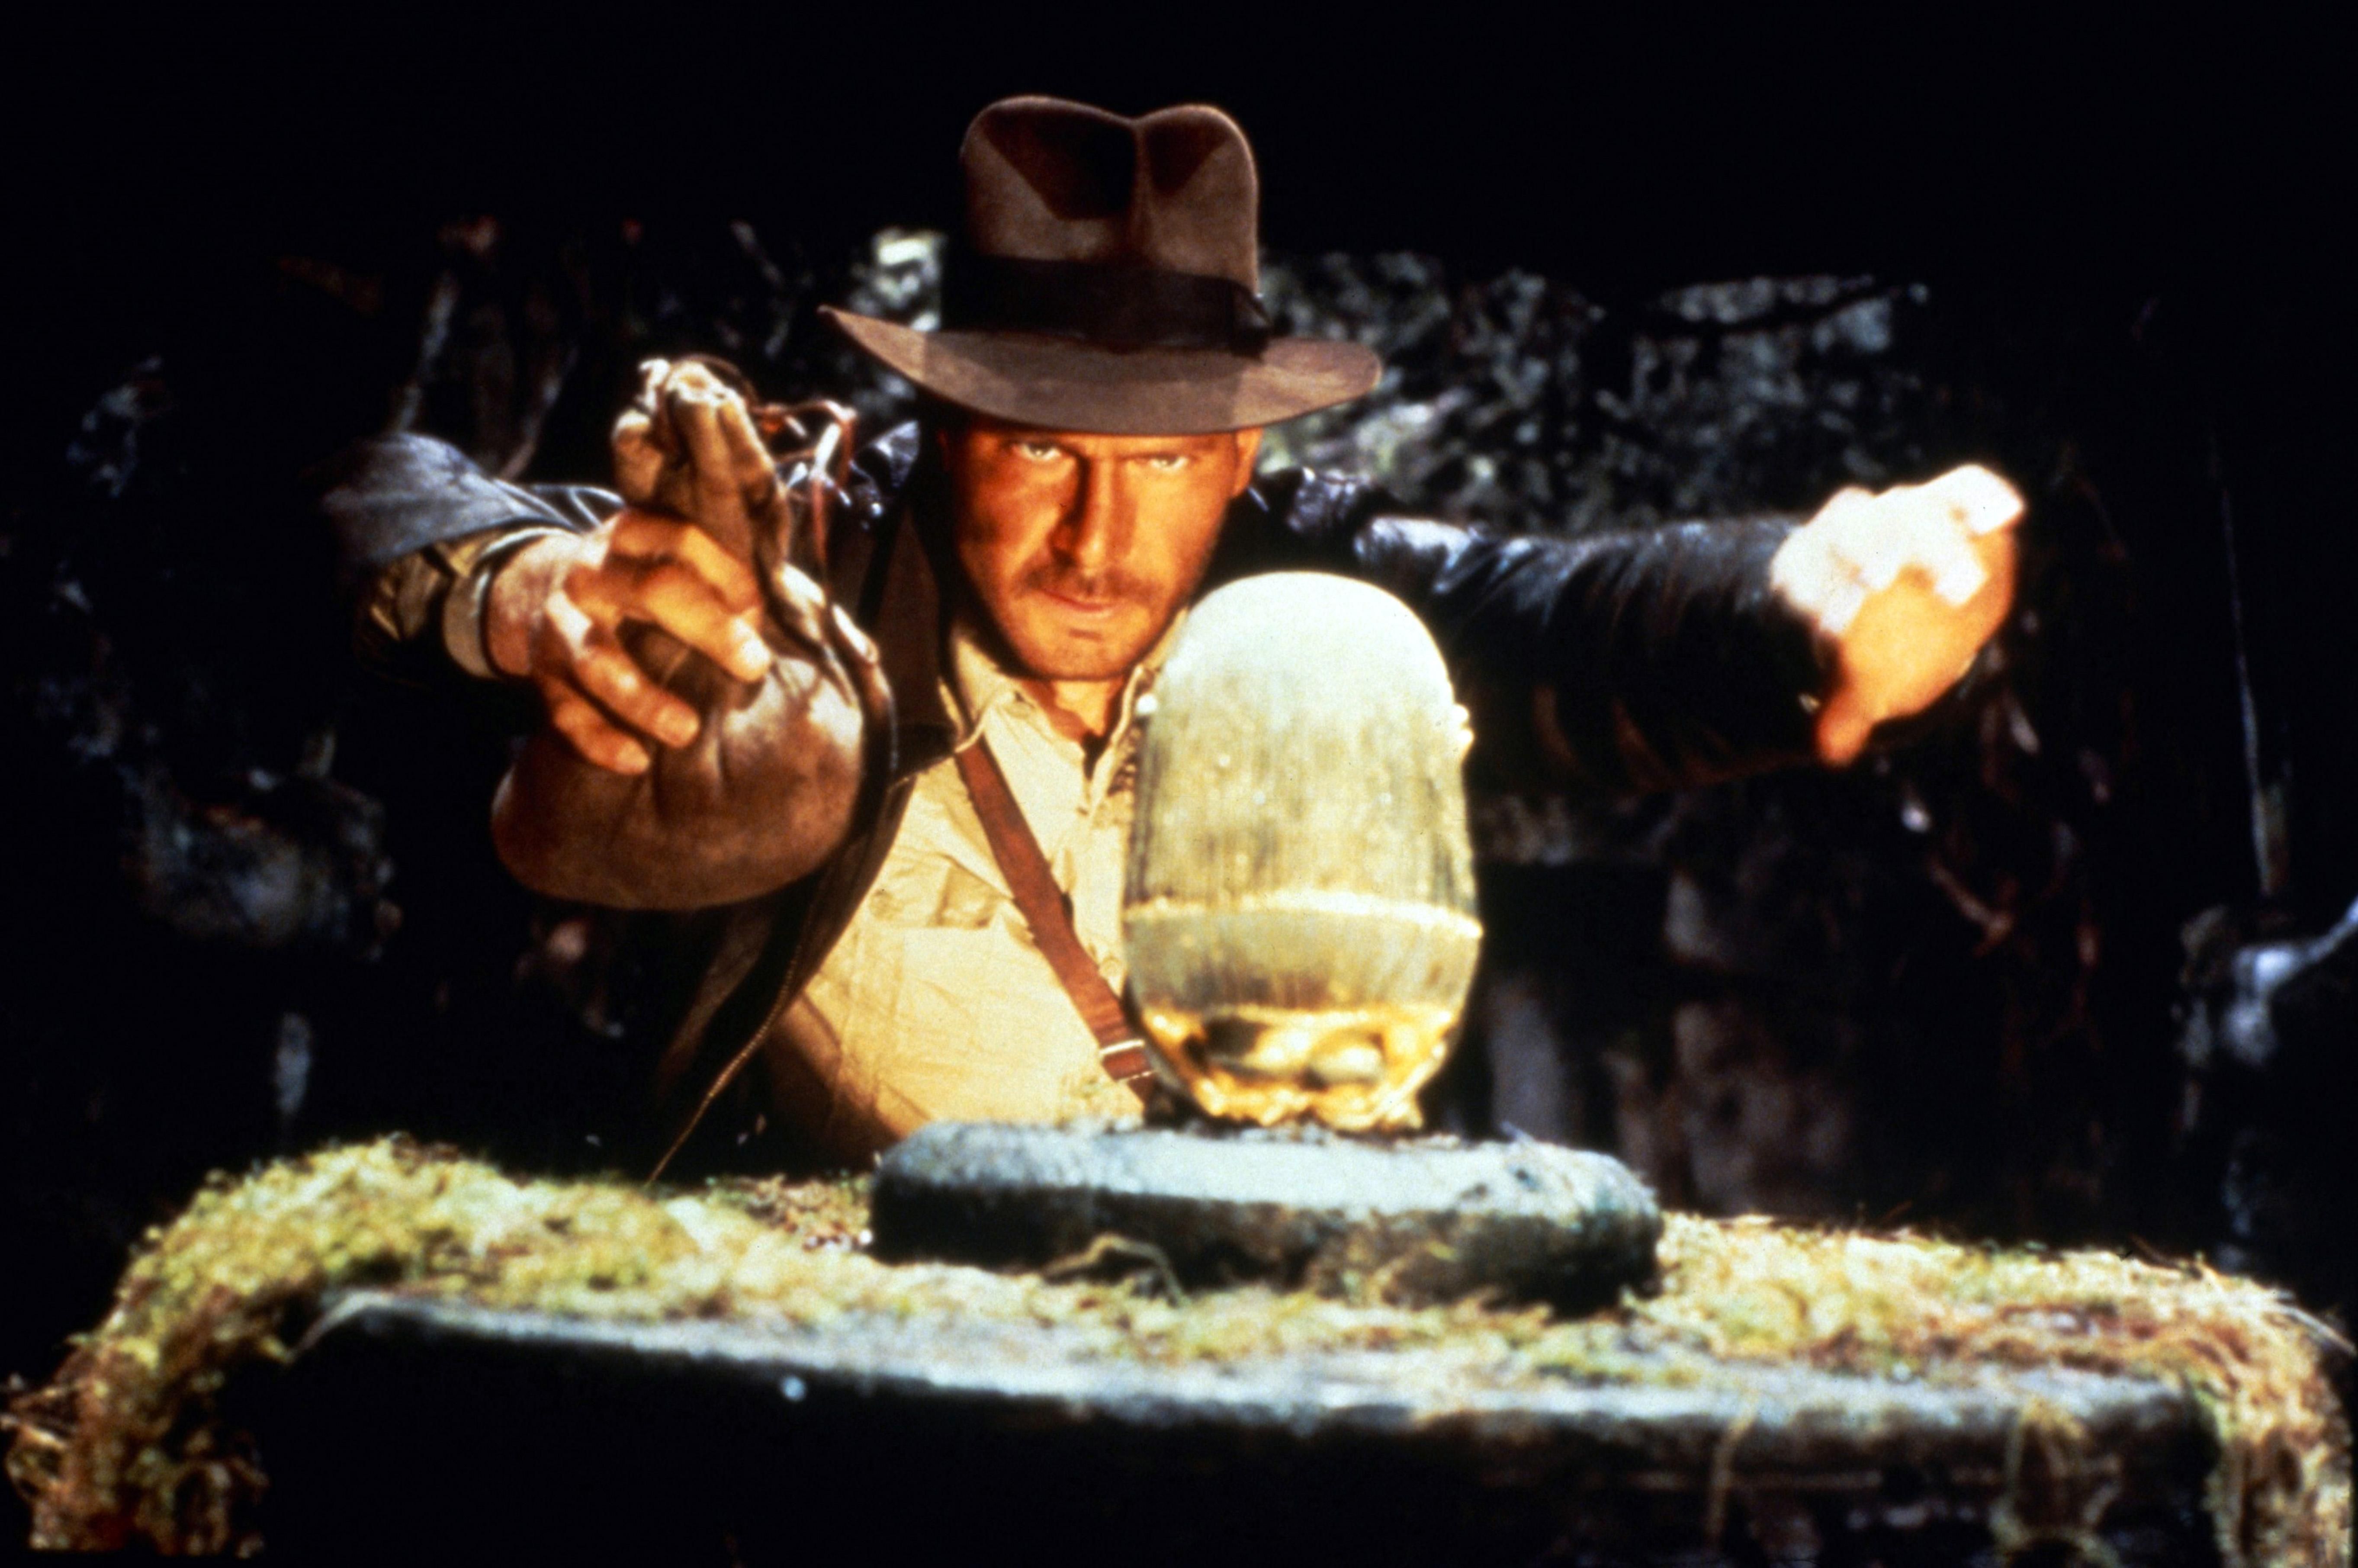 raiders-of-the-lost-ark harrison ford